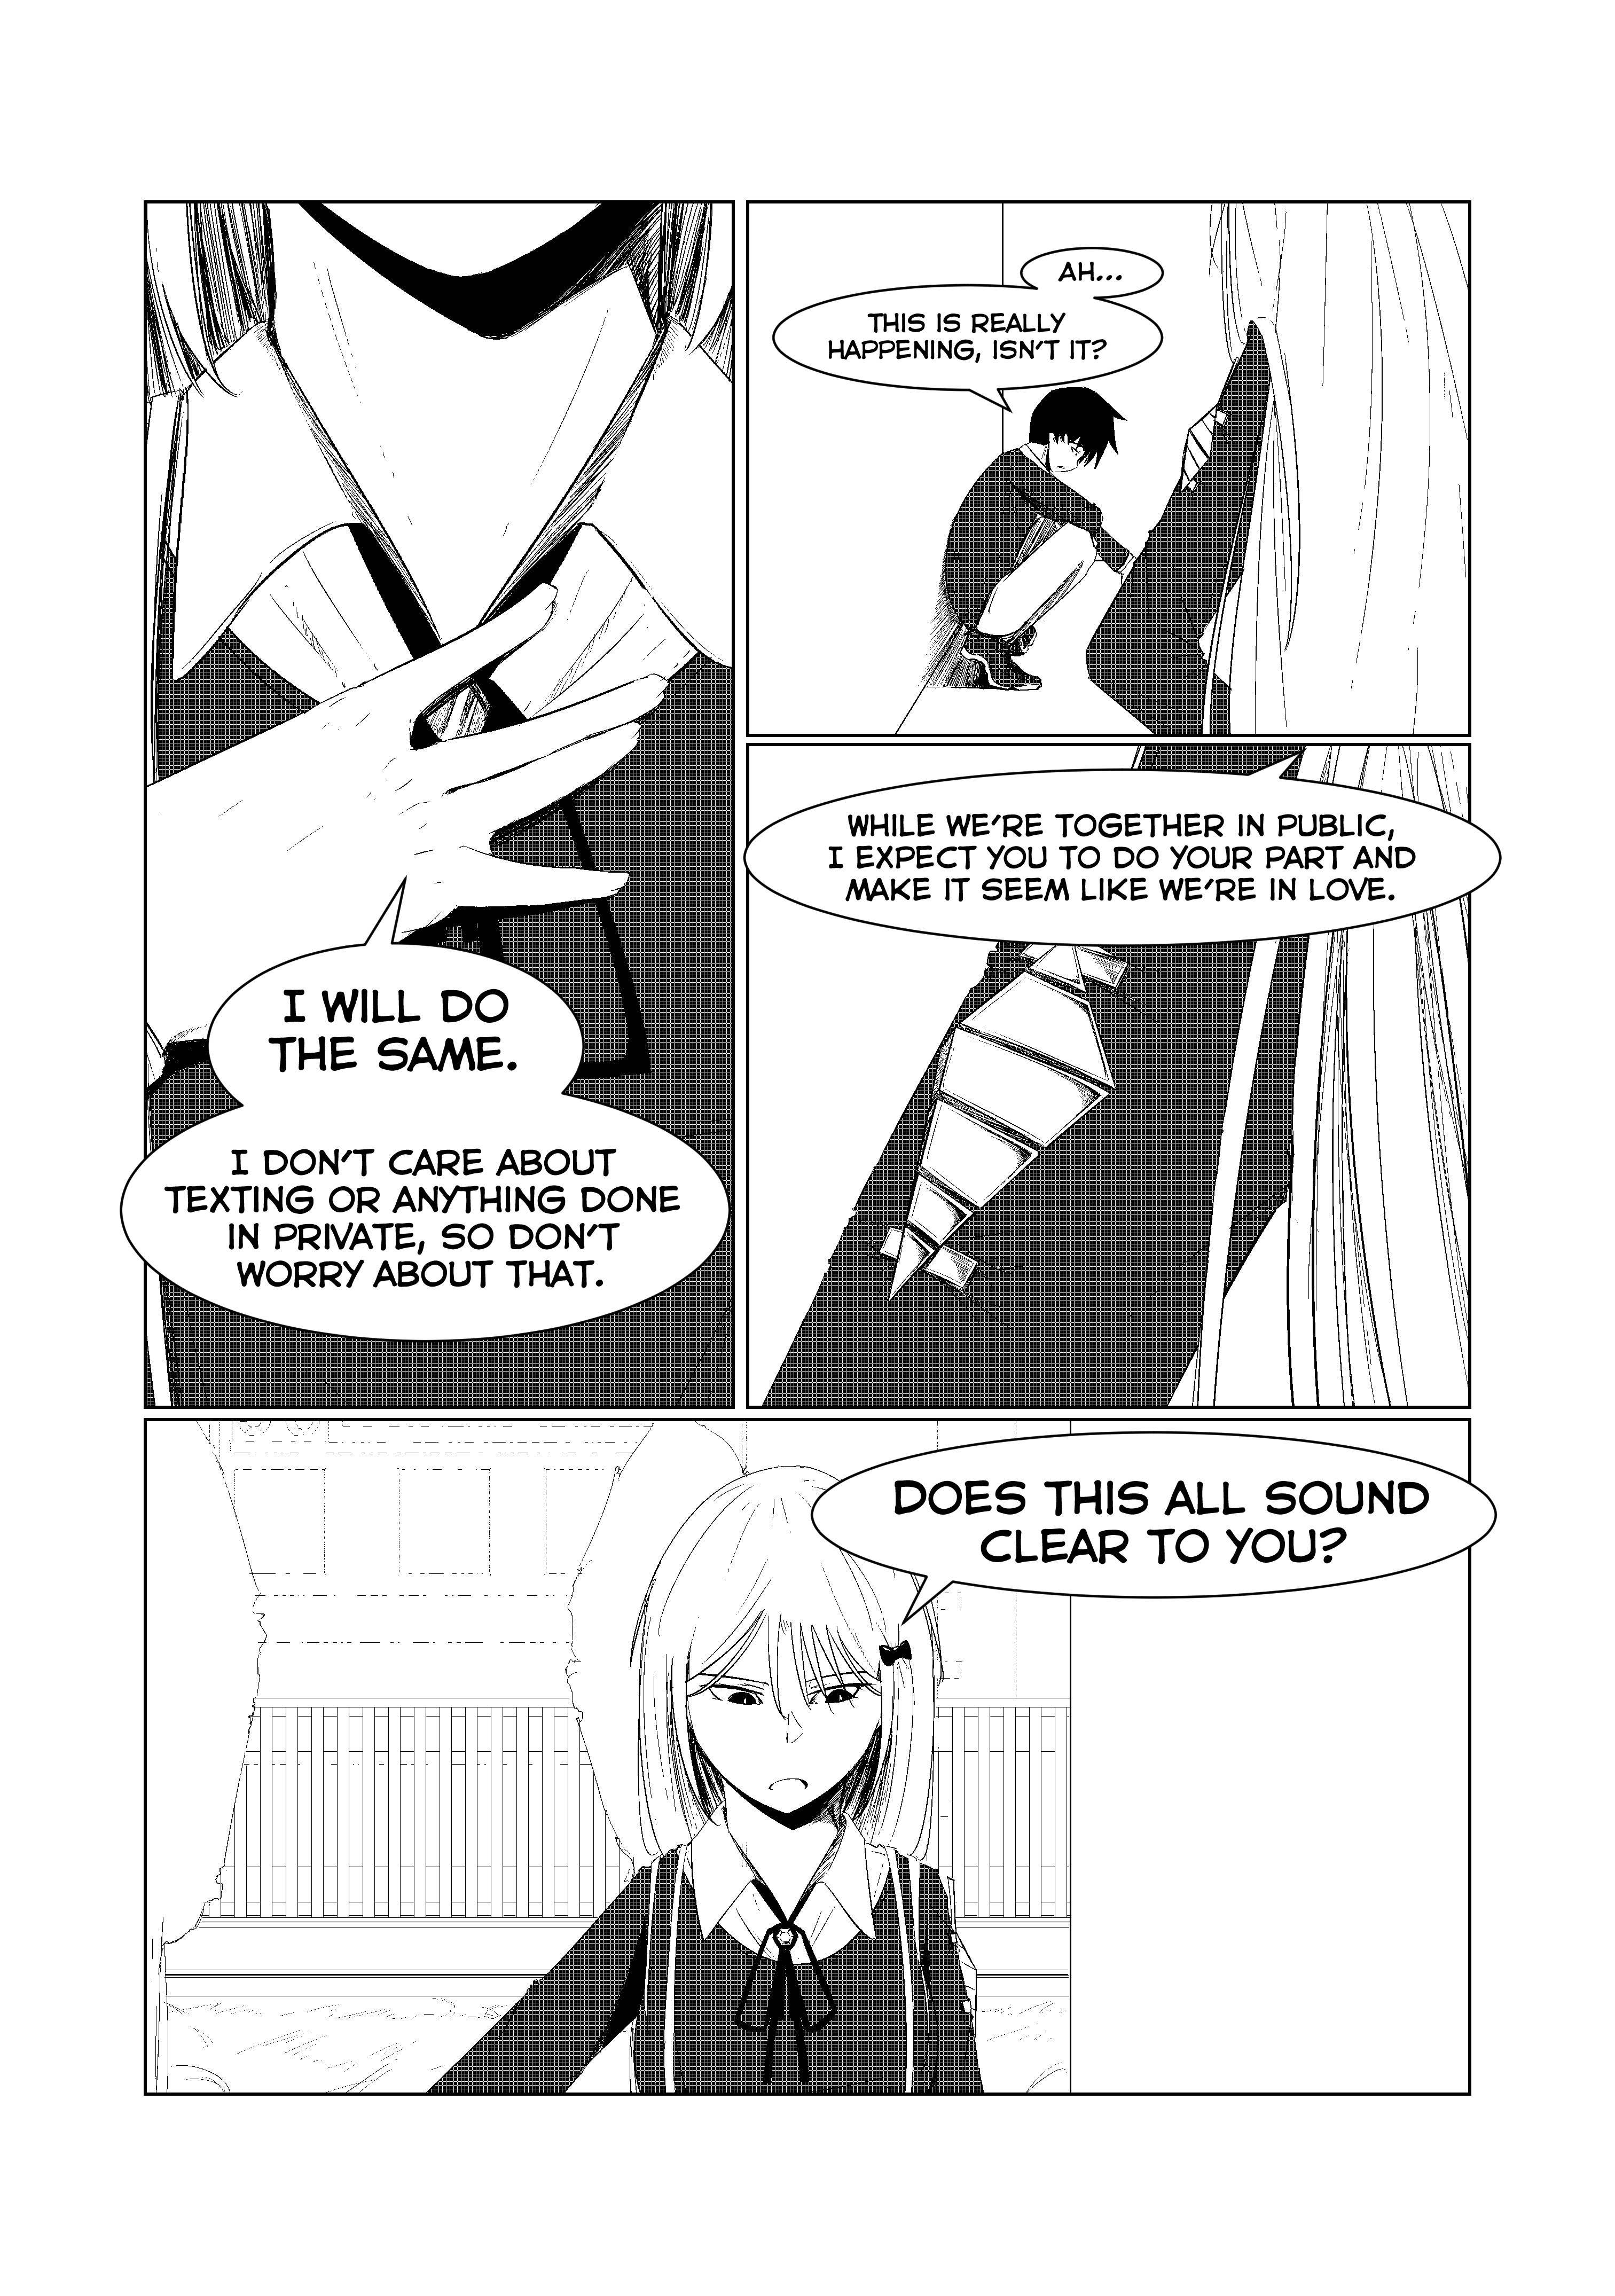 Opposites In Disguise - 2 page 11